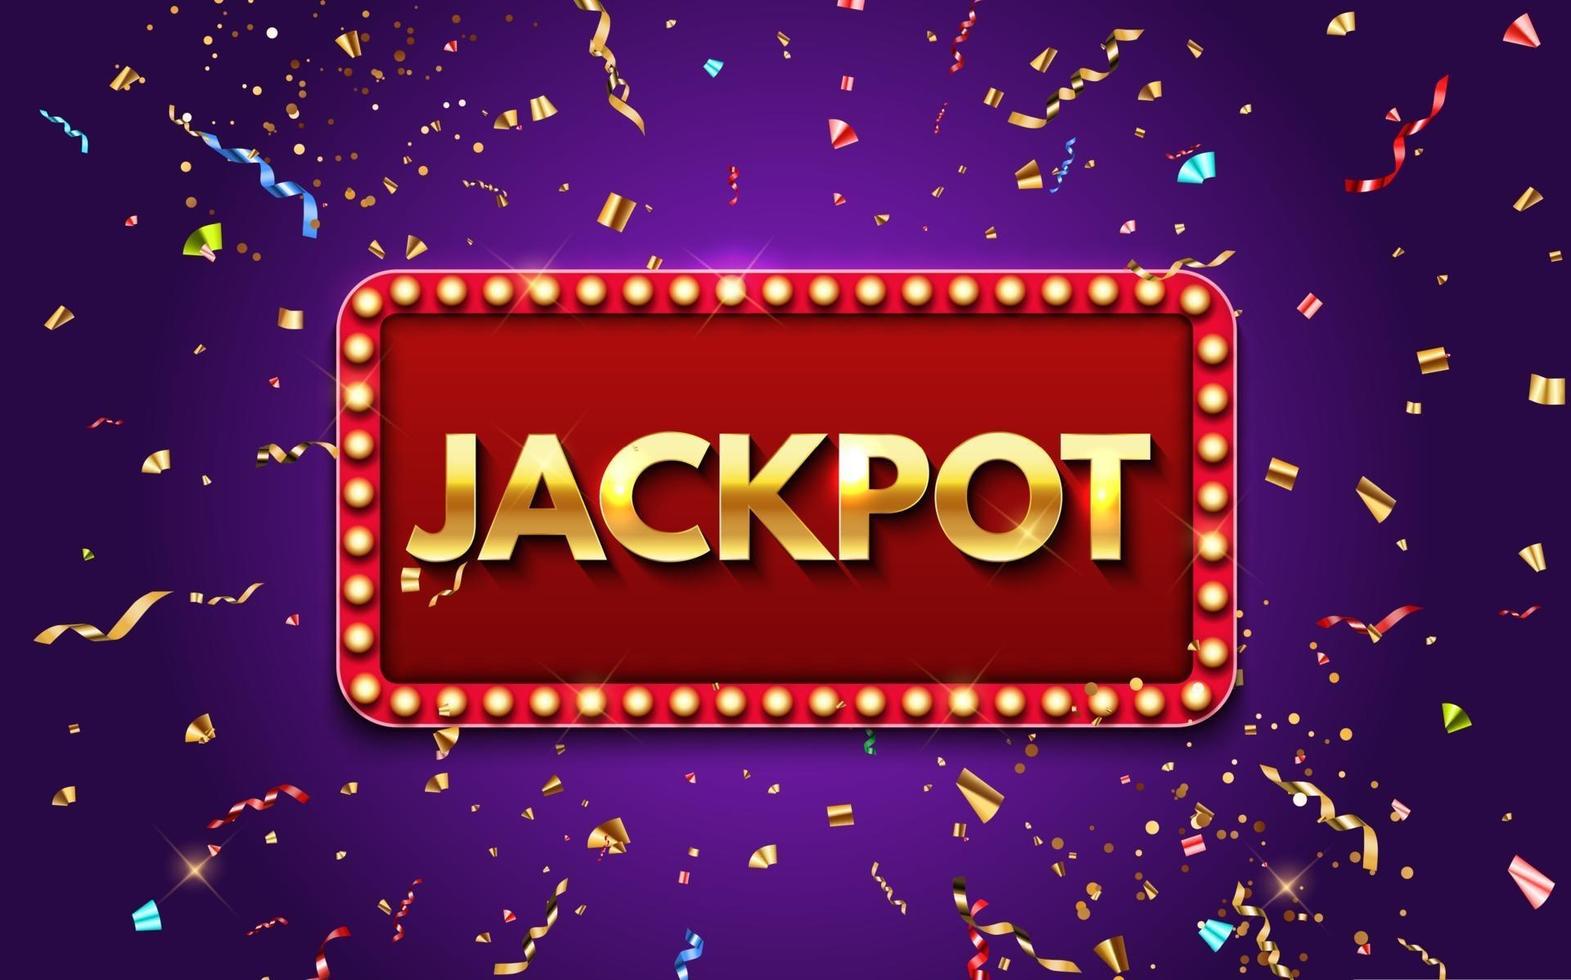 jackpot-background-with-falling-gold-confetti-casino-or-lottery-free-vector